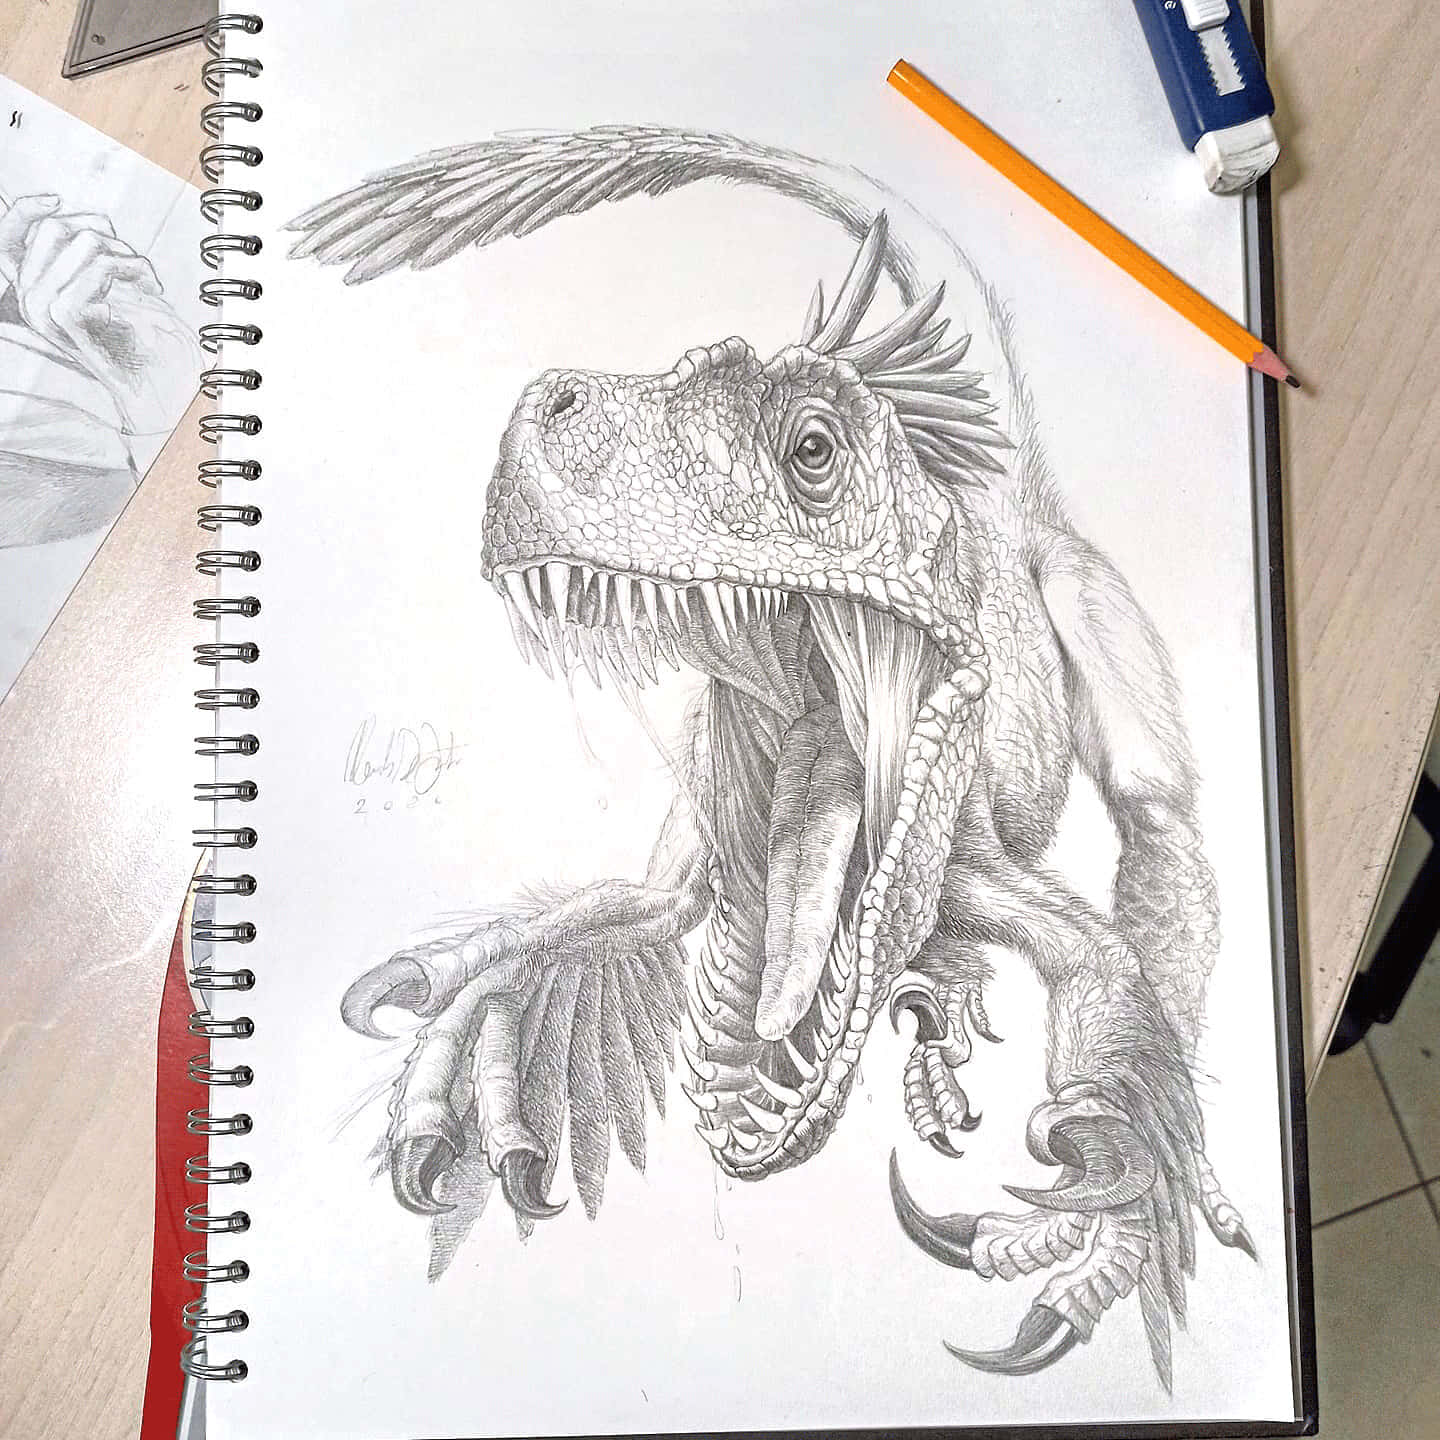 A Drawing of a Dinosaur in Full Color